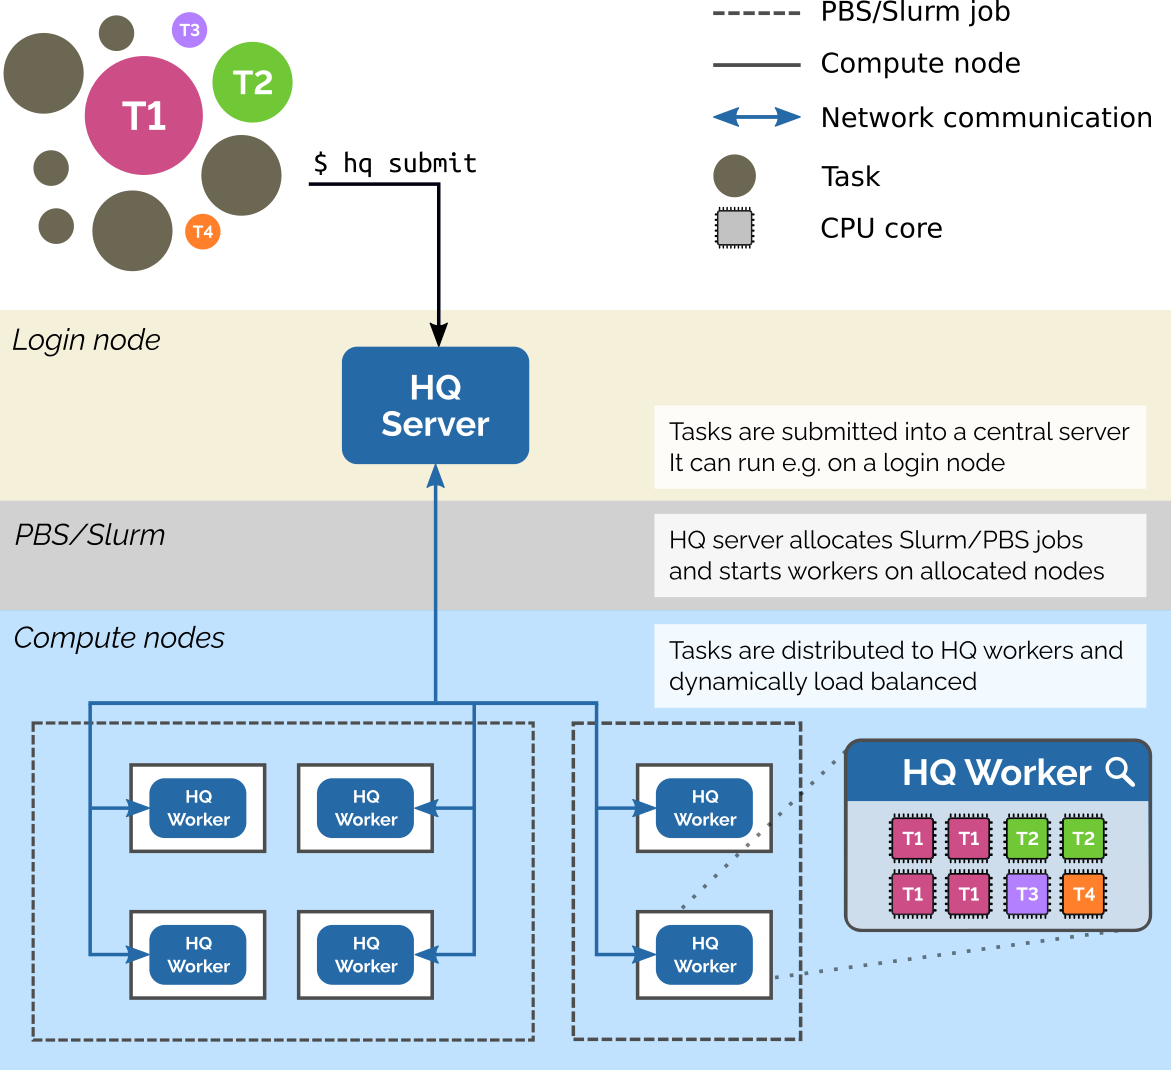 Architecture of HyperQueue deployed on a Slurm/PBS cluster